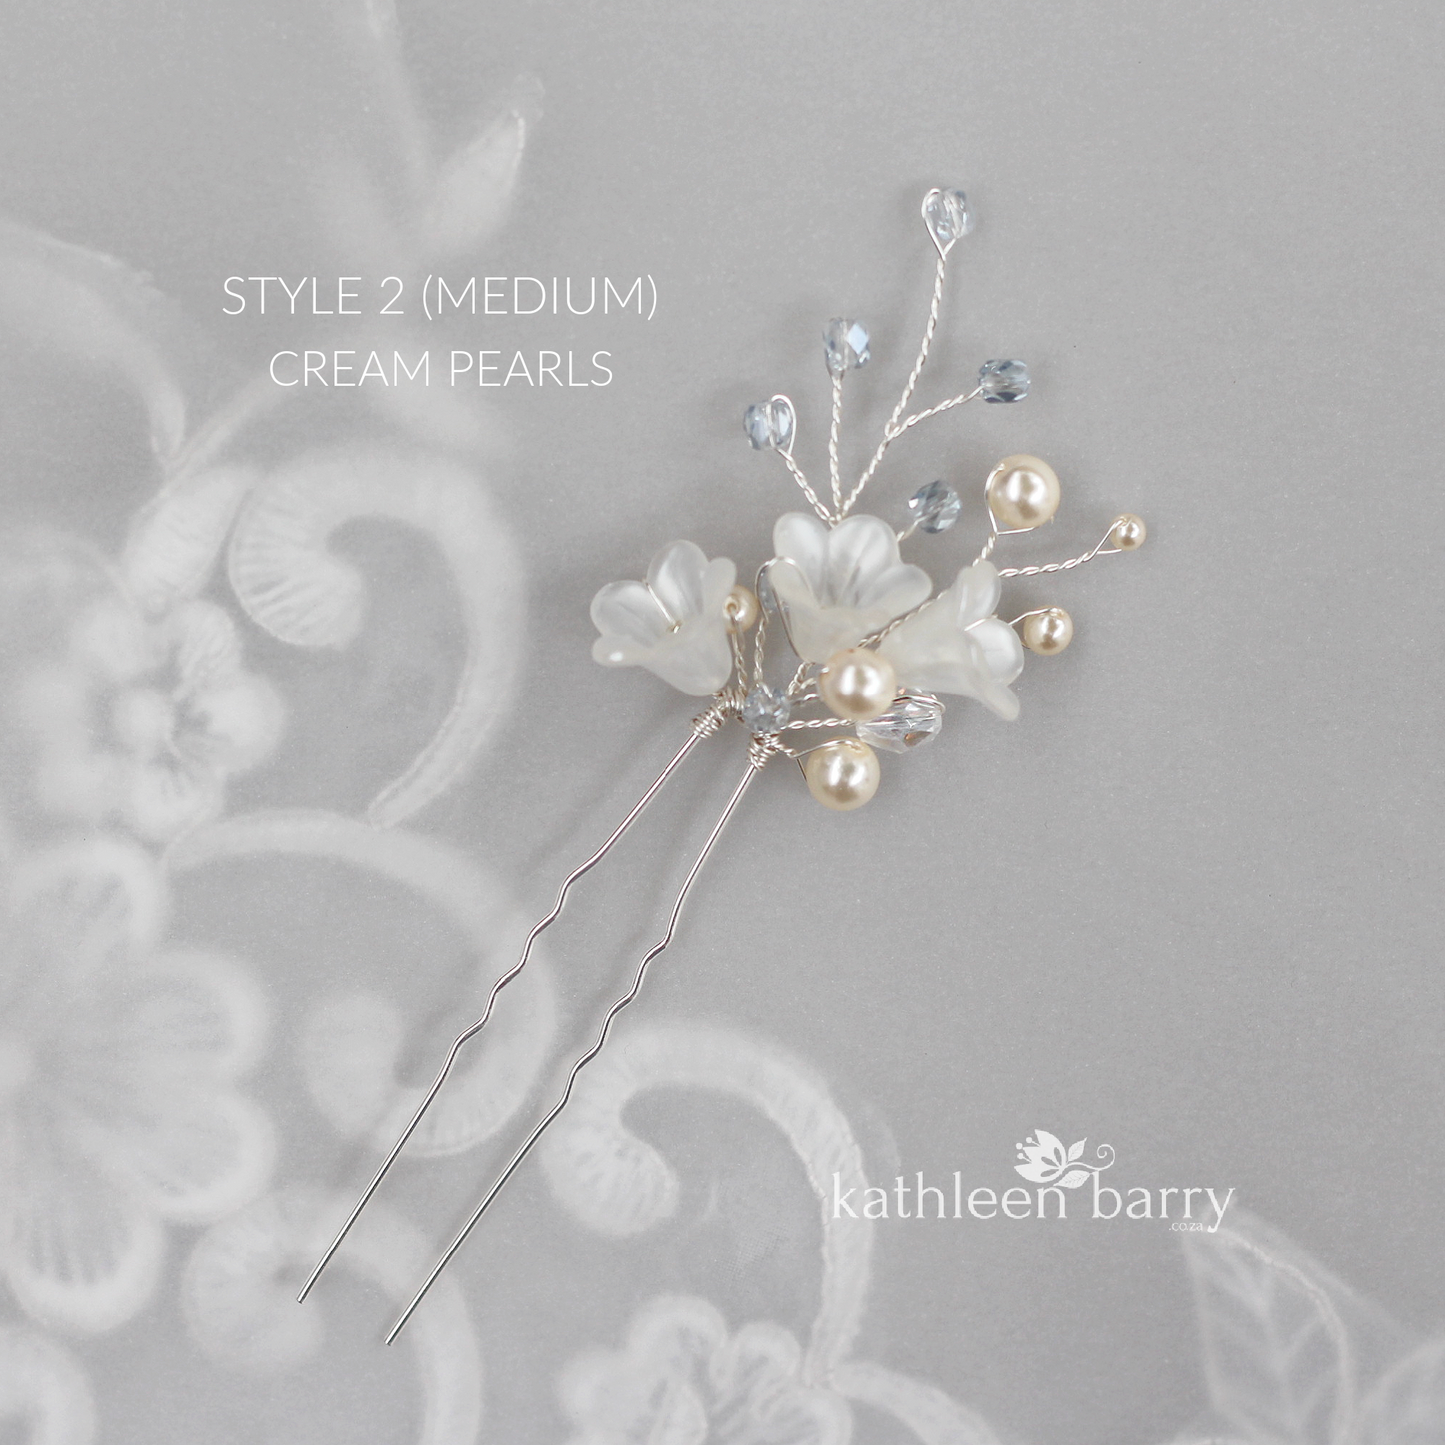 Monica pale blue hair pins mix and match - 3 styles - Rose gold, Gold or silver (sold individually)